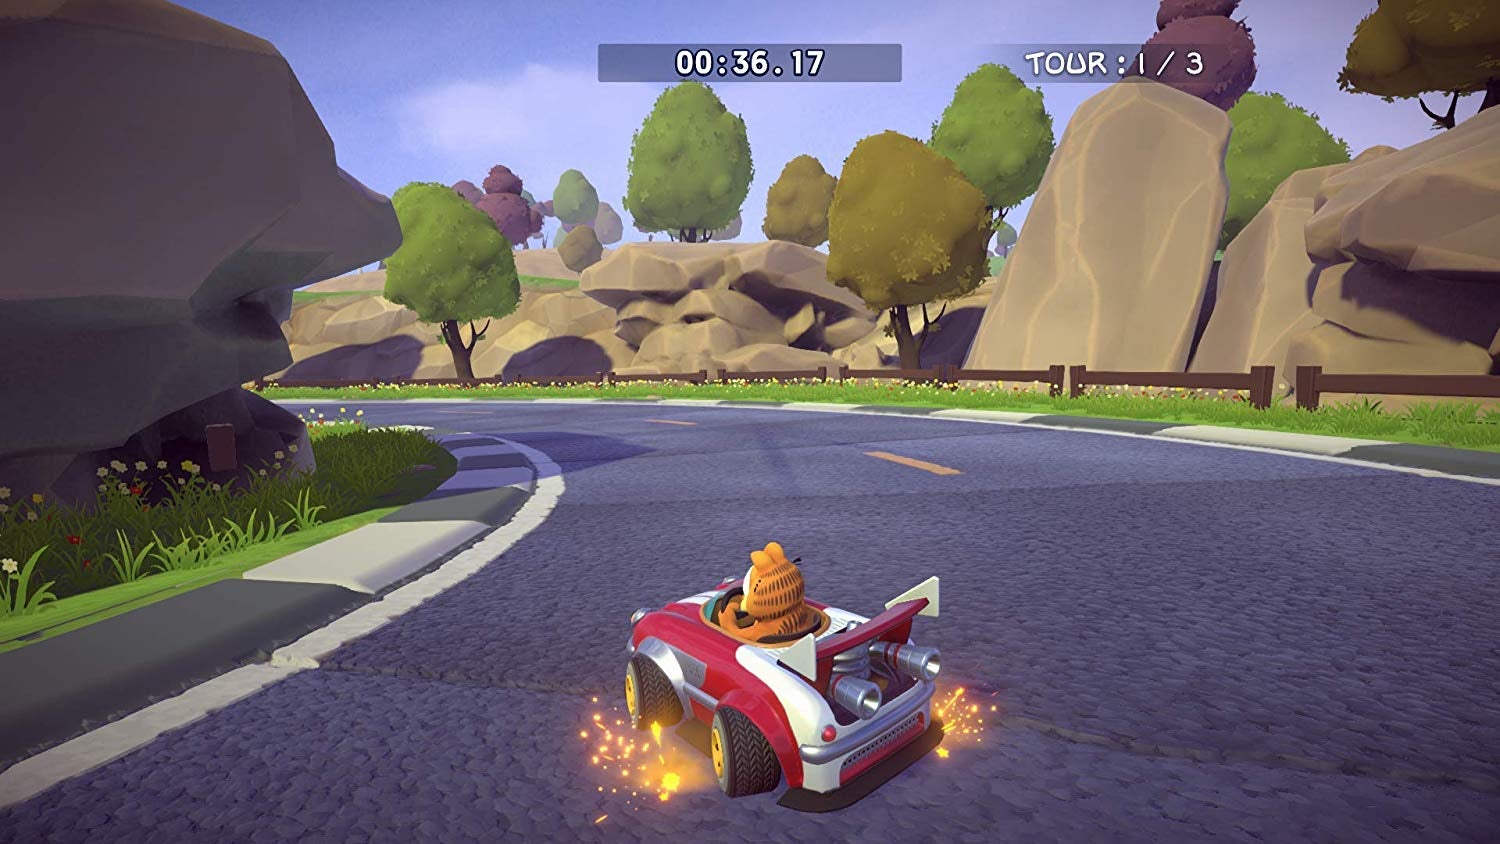 I Wish To Inform You That Another Garfield Kart Has Been Made